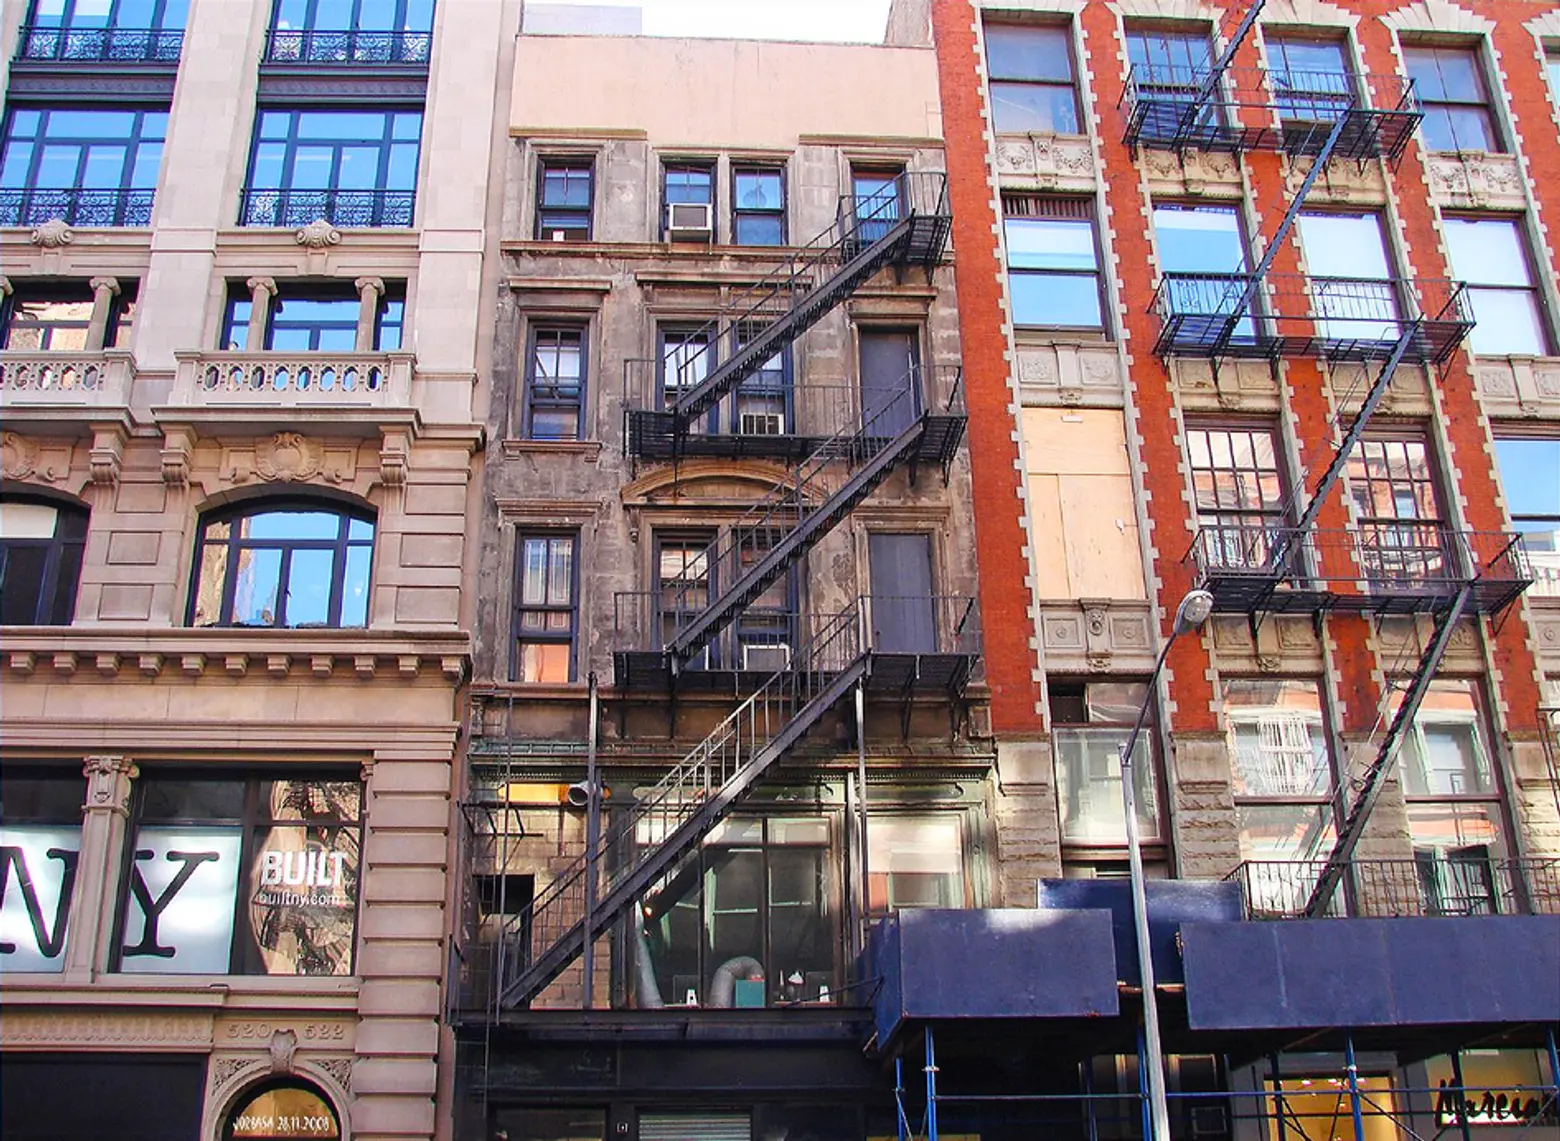 Rent Stabilization Demystified Know the Rules, Your Rights, and if You